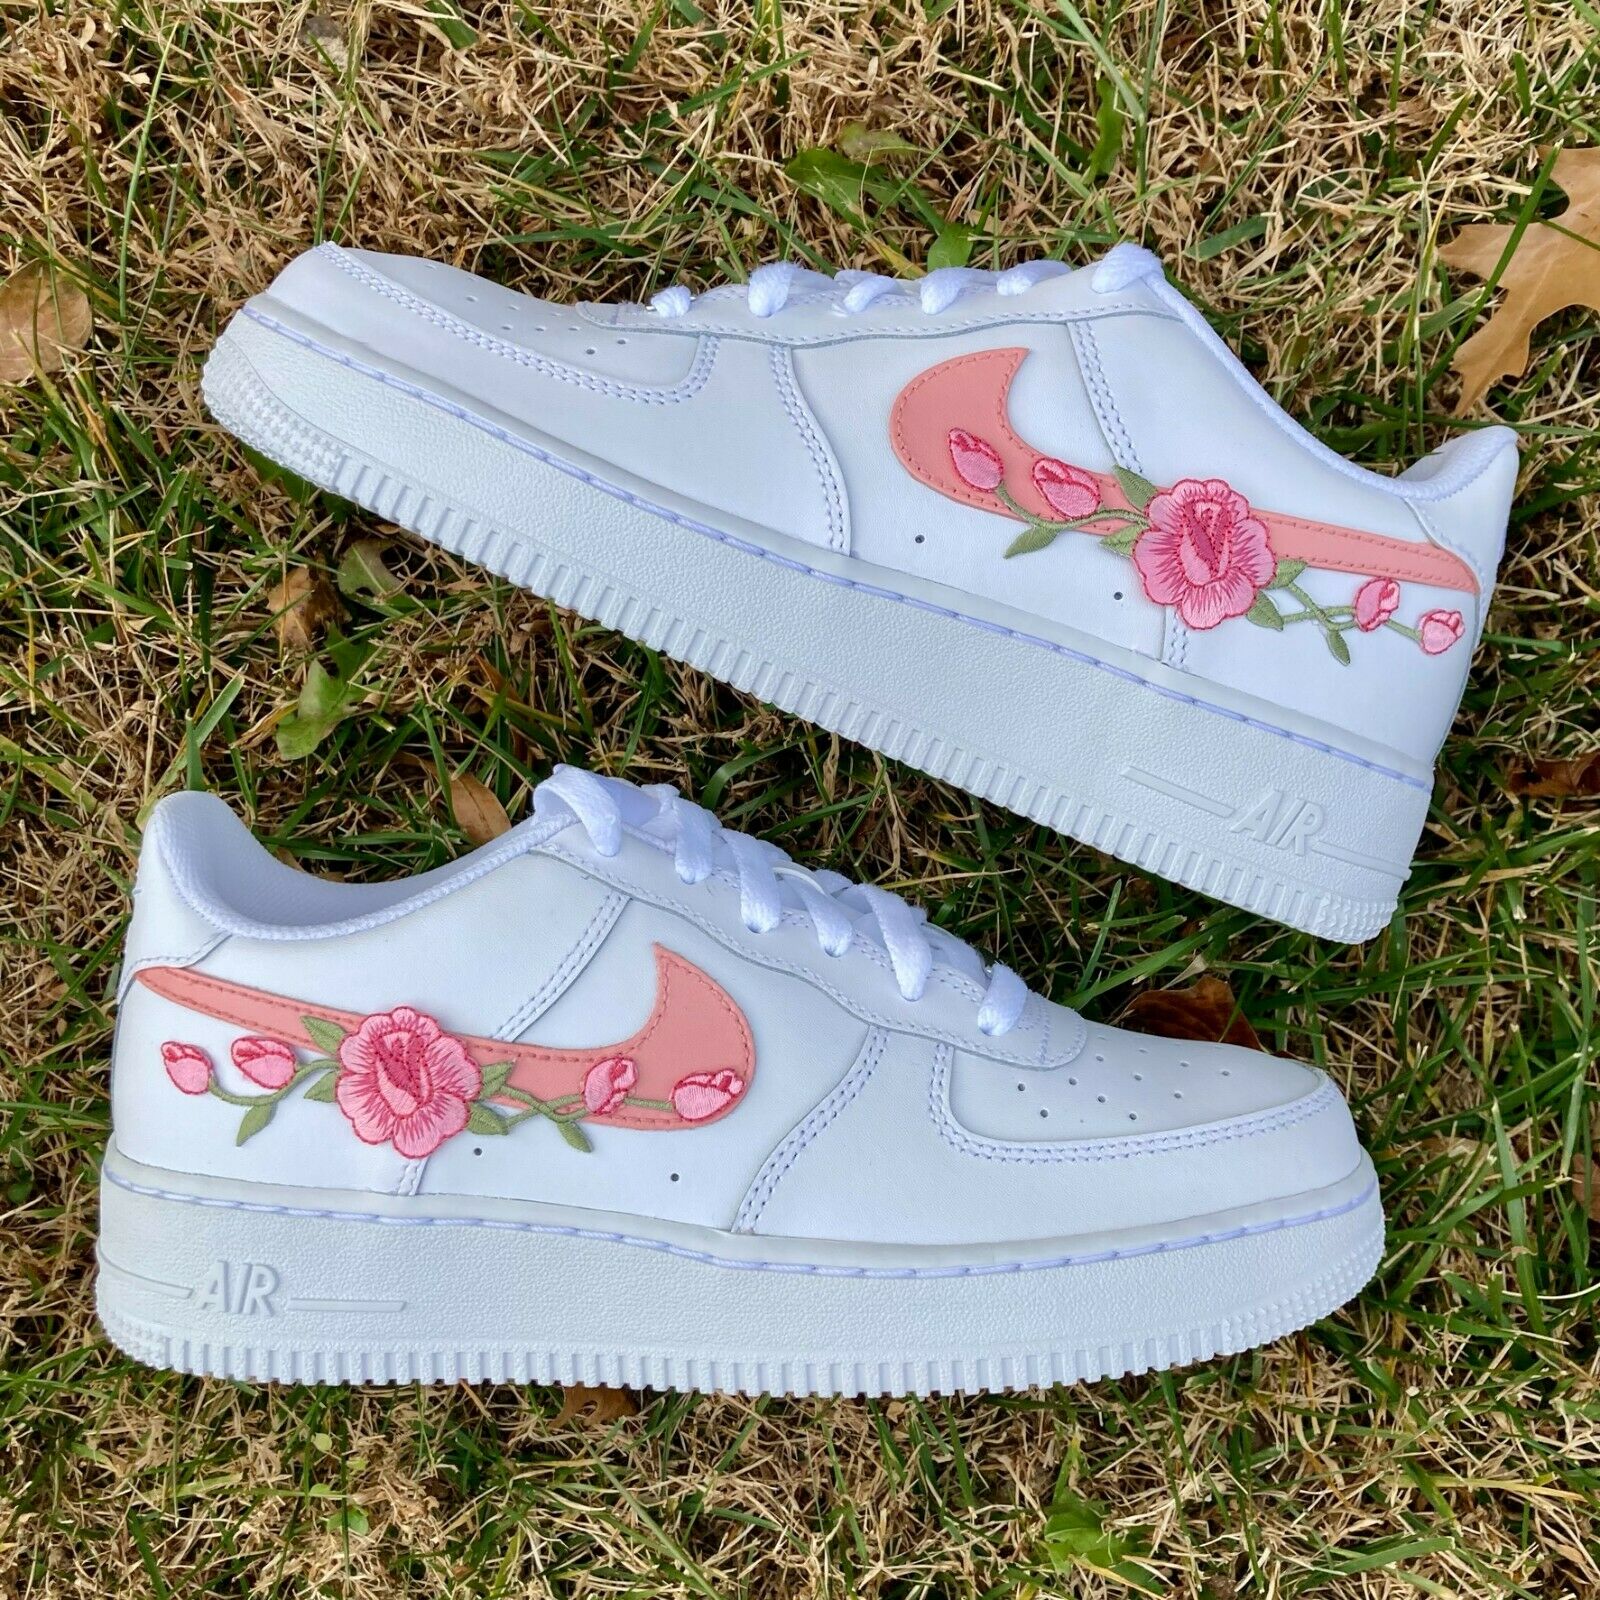 Air Force 1 Custom Low Gender Reveal Shoes Baby Blue & Pink All Sizes Af1 Sneakers 16 Mens (17.5 Women's)